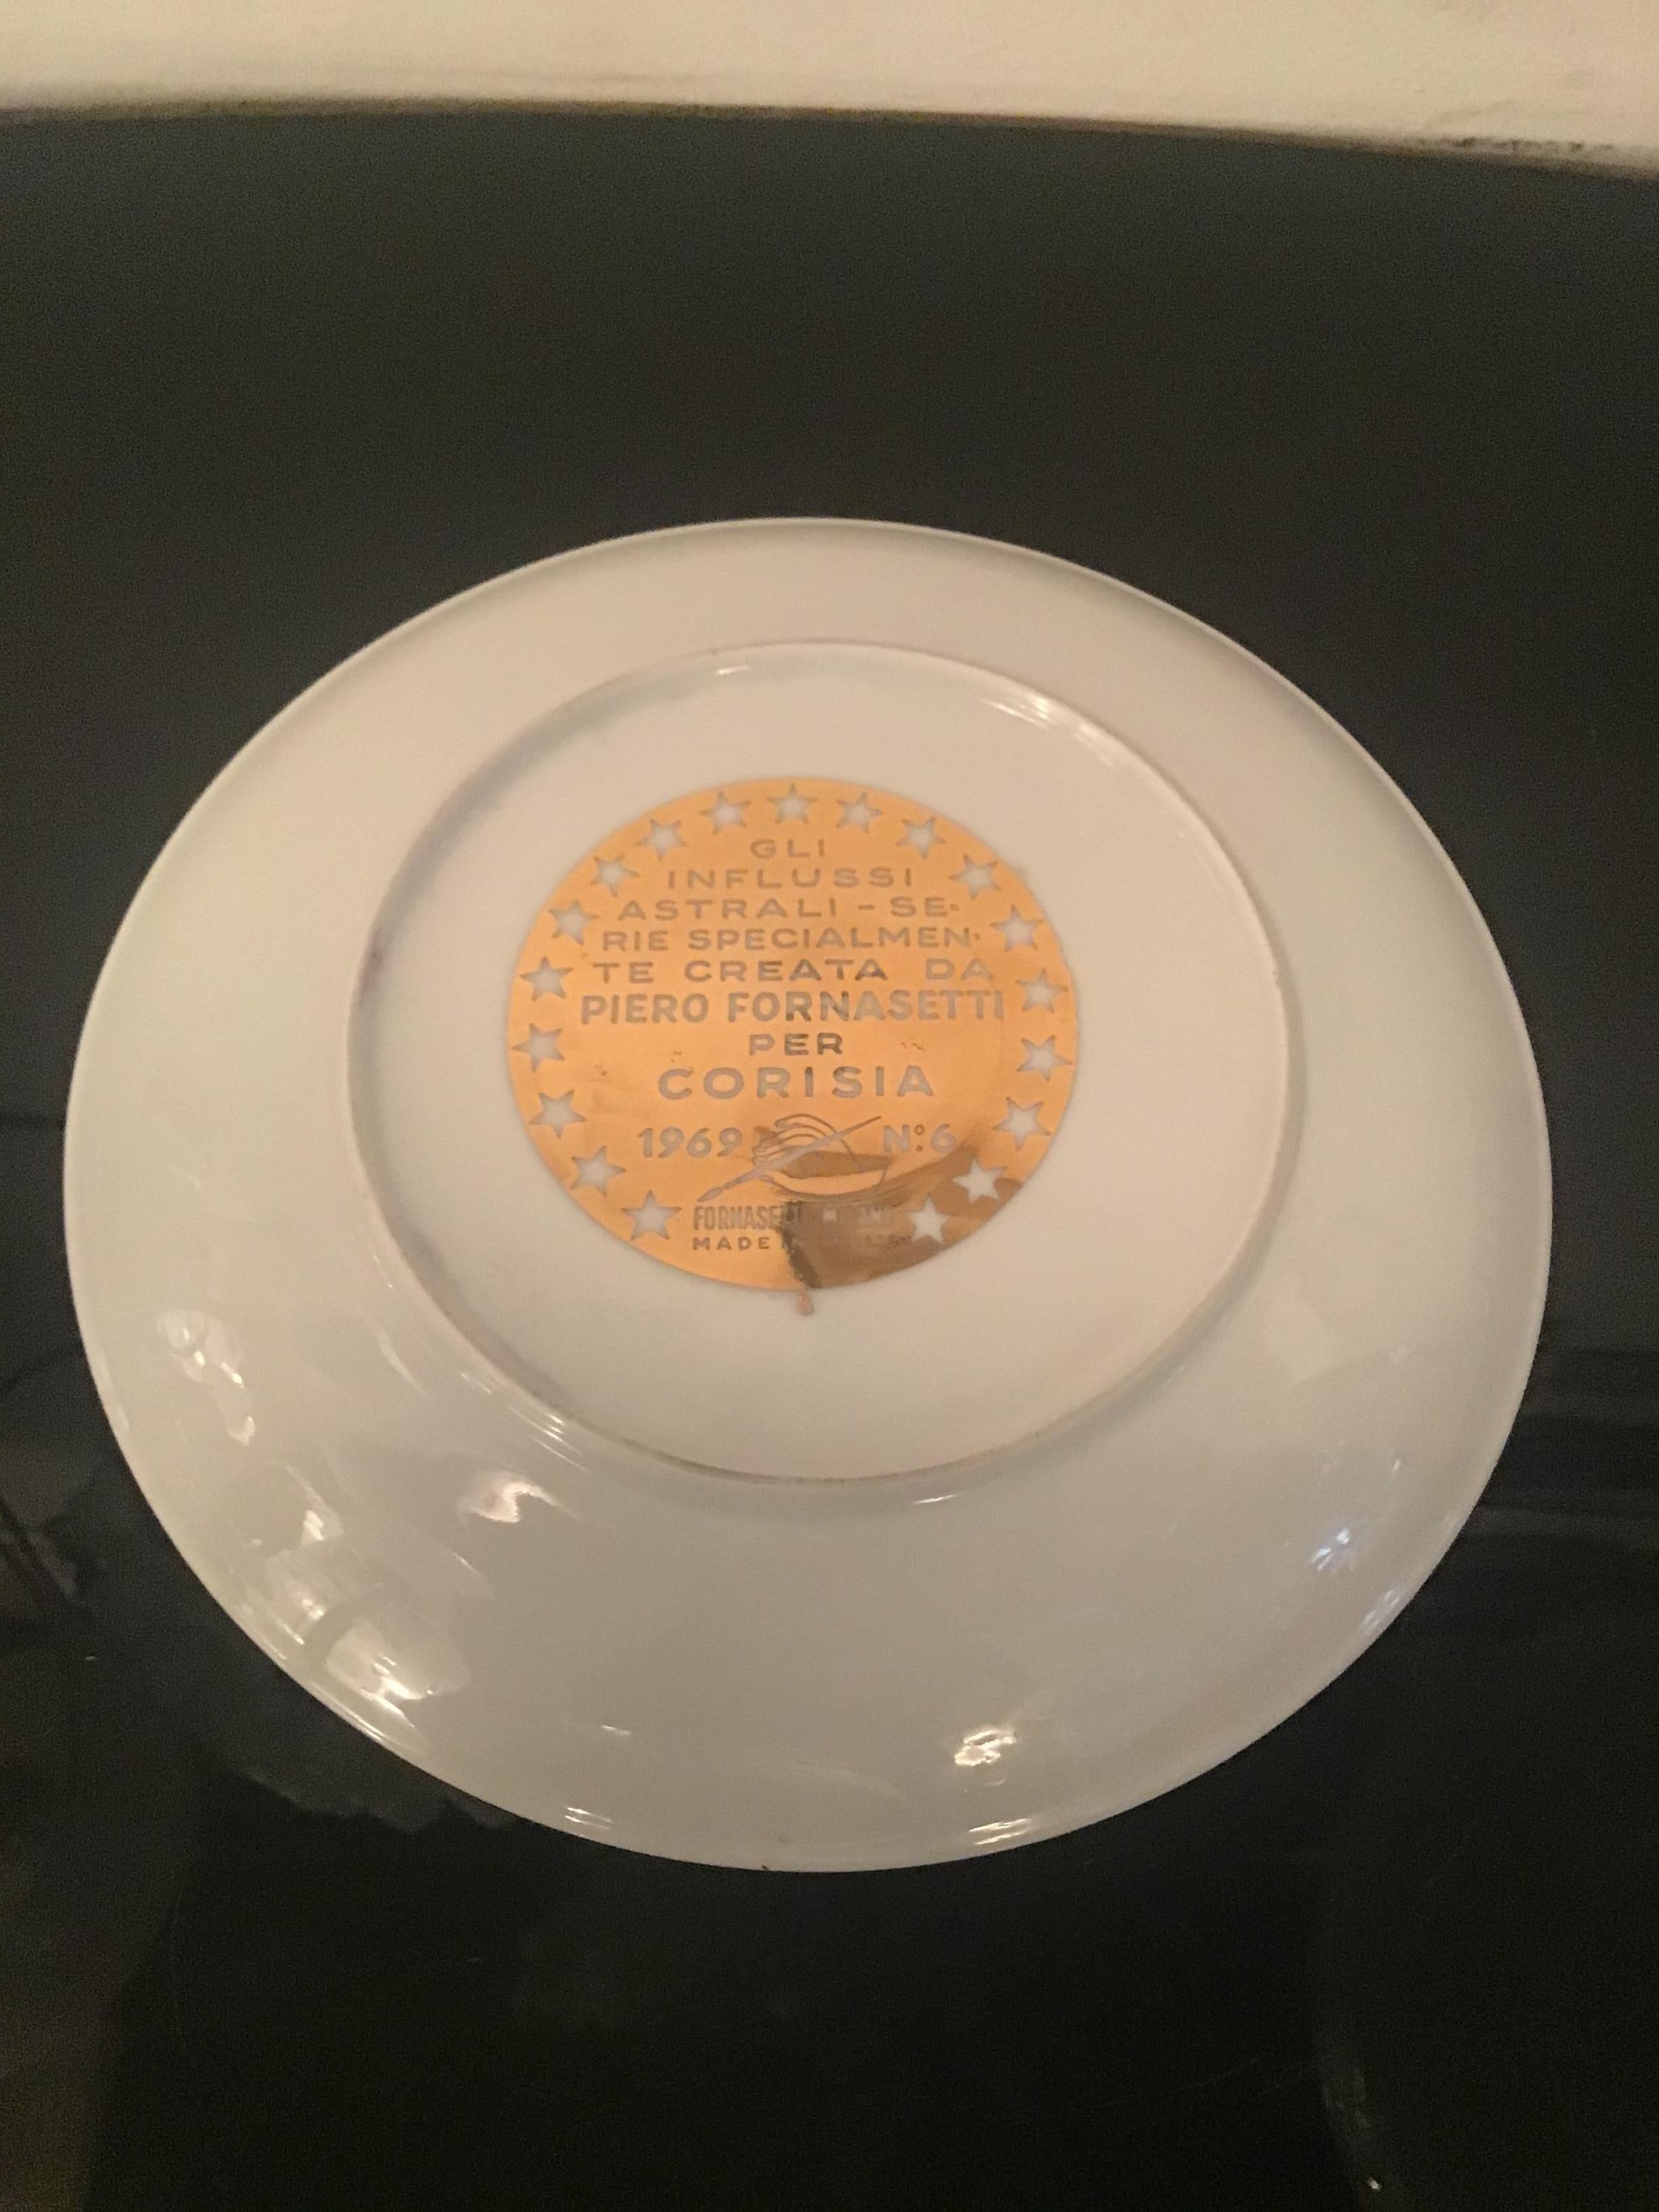 Piero Fornasetti “Virgo” Plate Porcelain Gold, 1969, Italy In Excellent Condition For Sale In Milano, IT